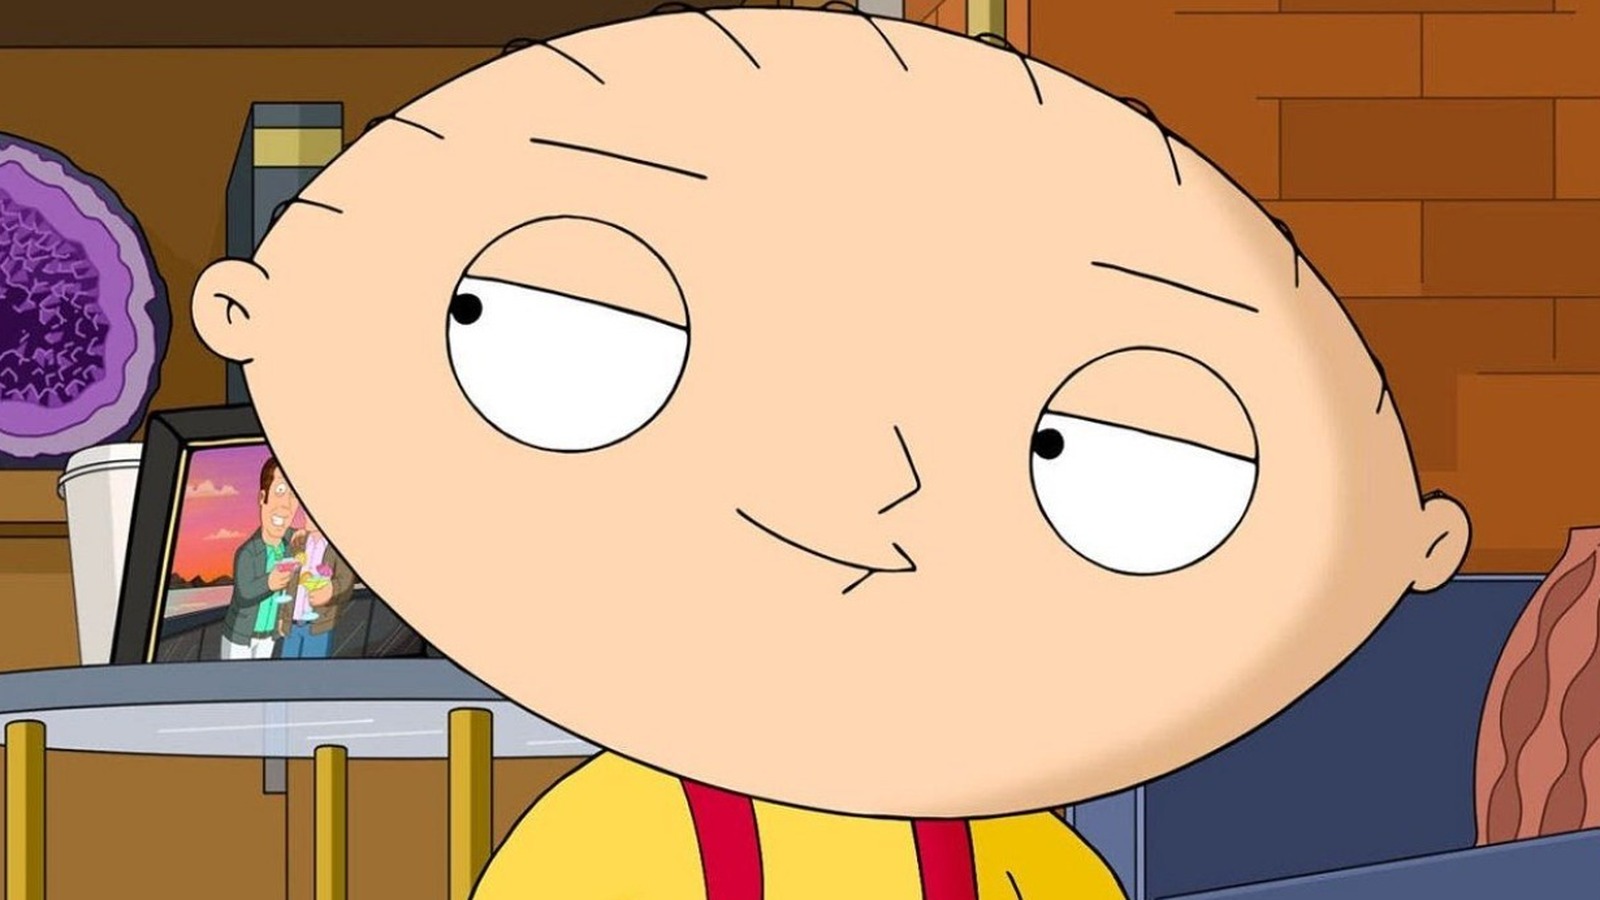 family guy stewie griffin